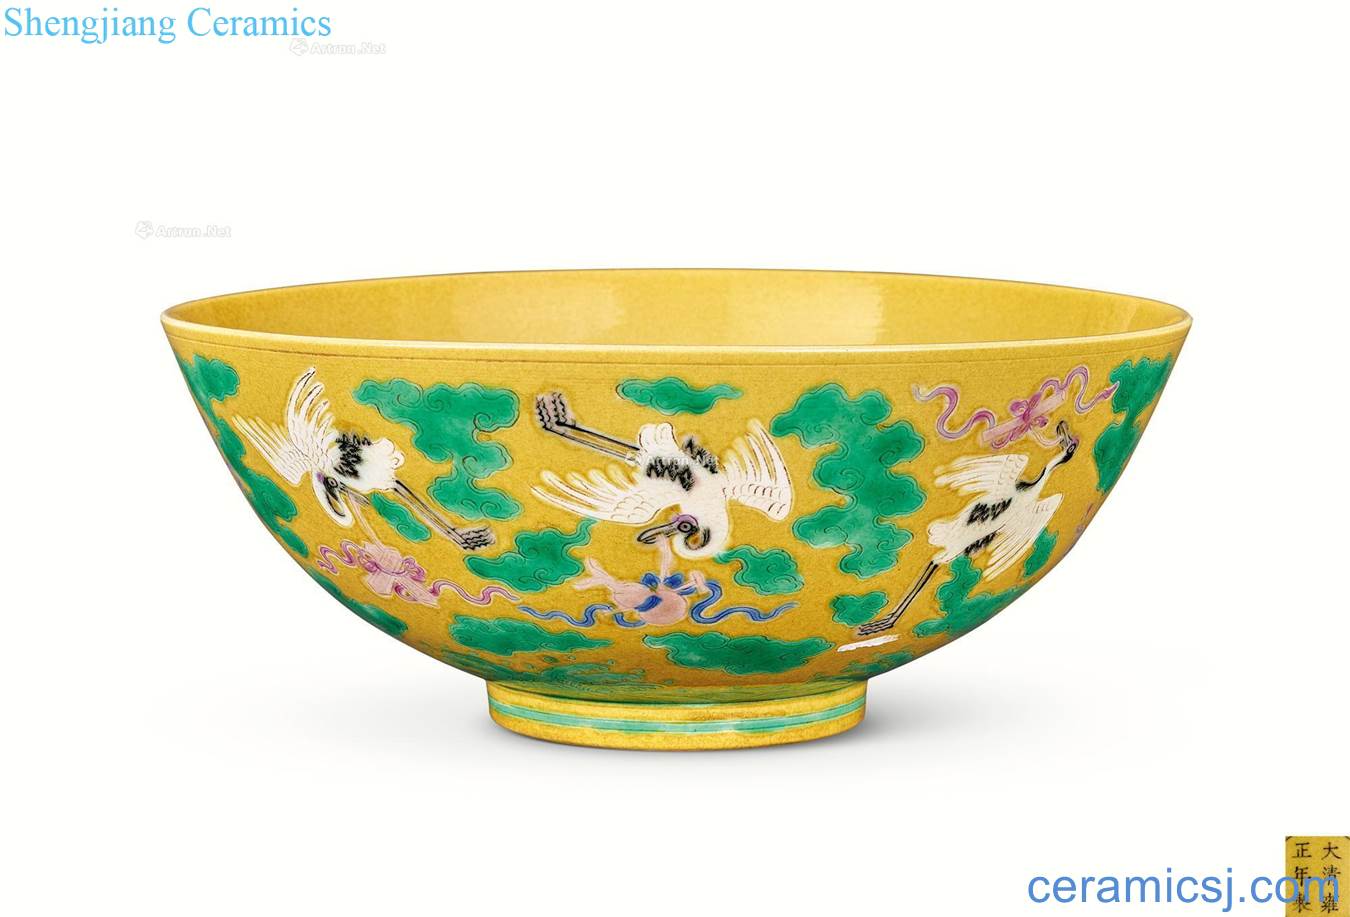 In the qing dynasty Yellow to pastel James t. c. na was published green-splashed bowls